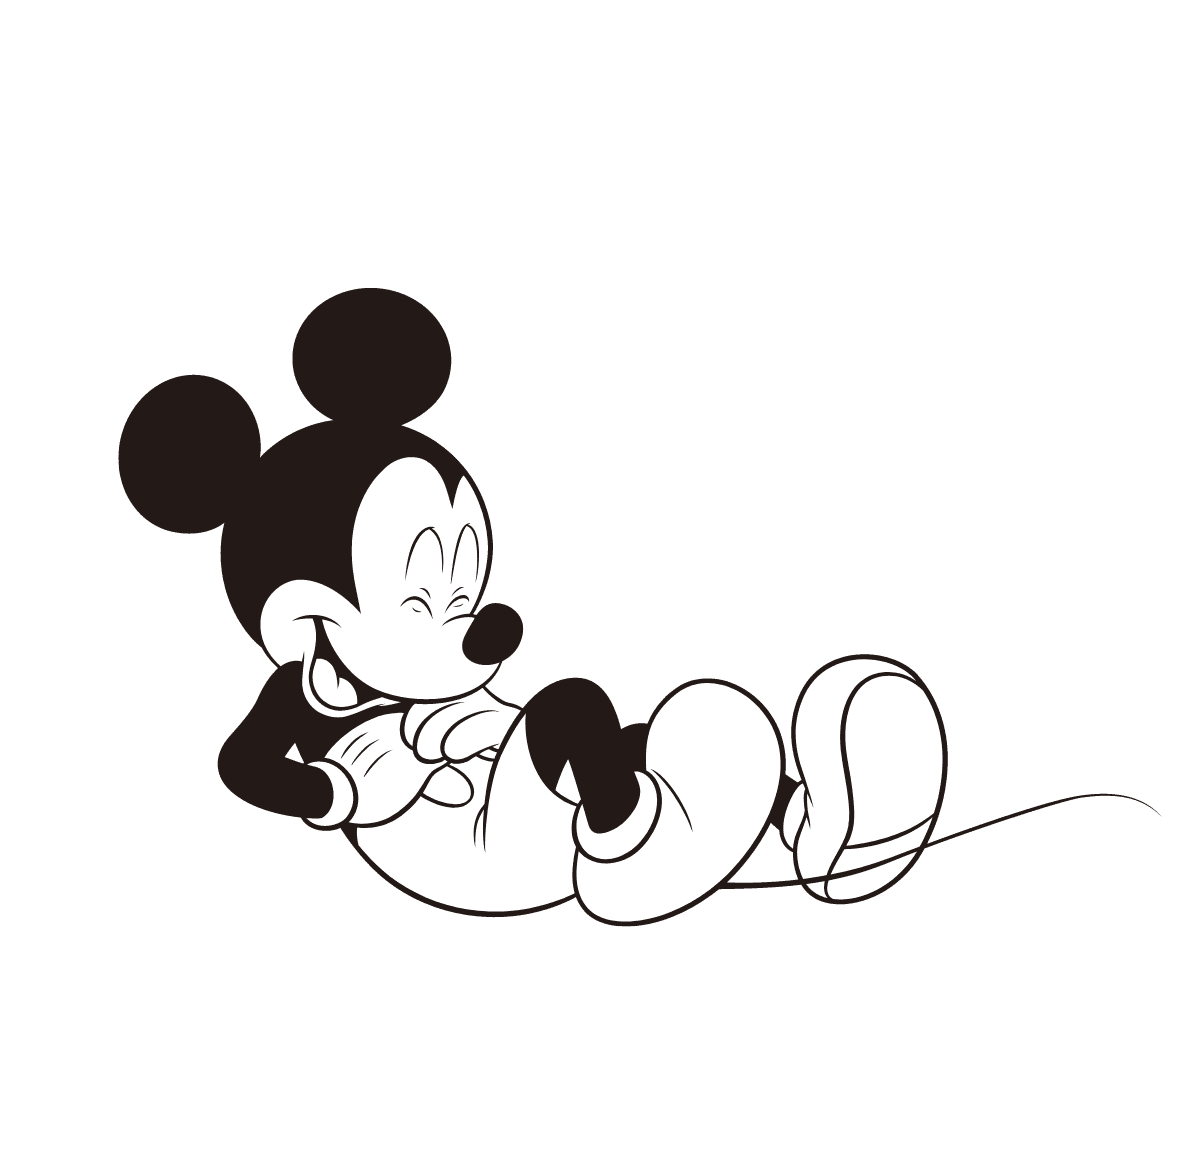 An animated GIF of Mickey Mouse, looking up while facing away, then turning around and playfully dancing.